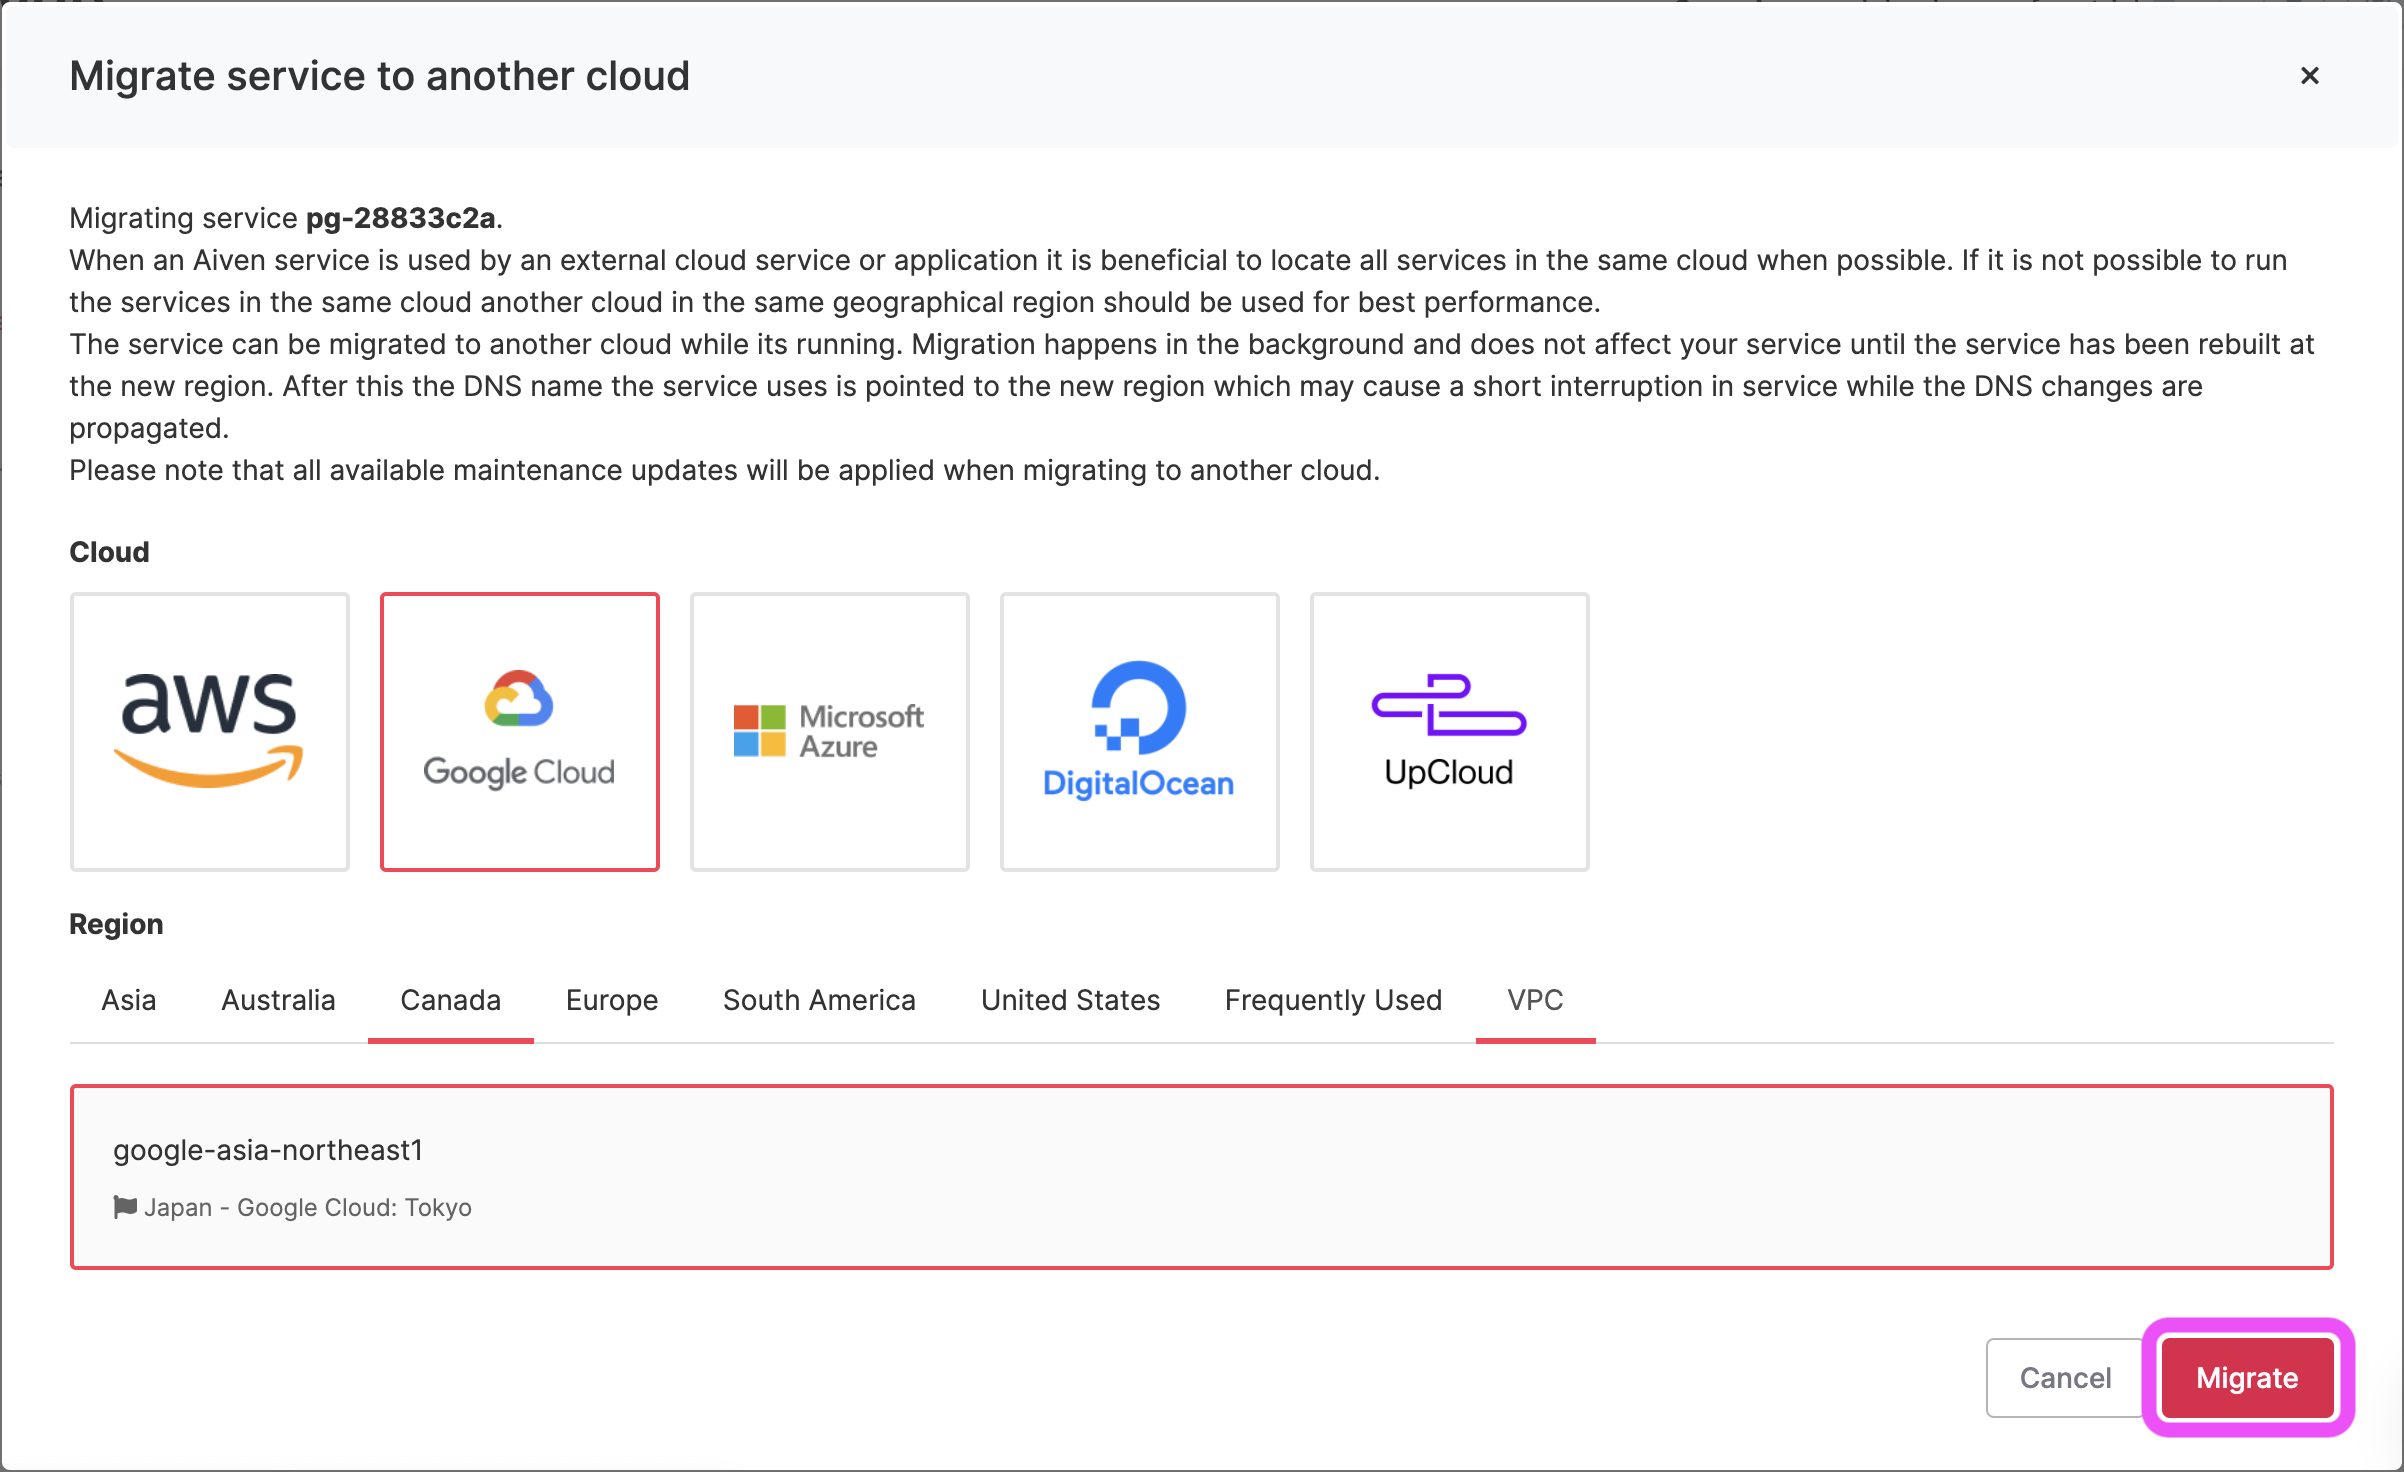 Migrate service to another cloud